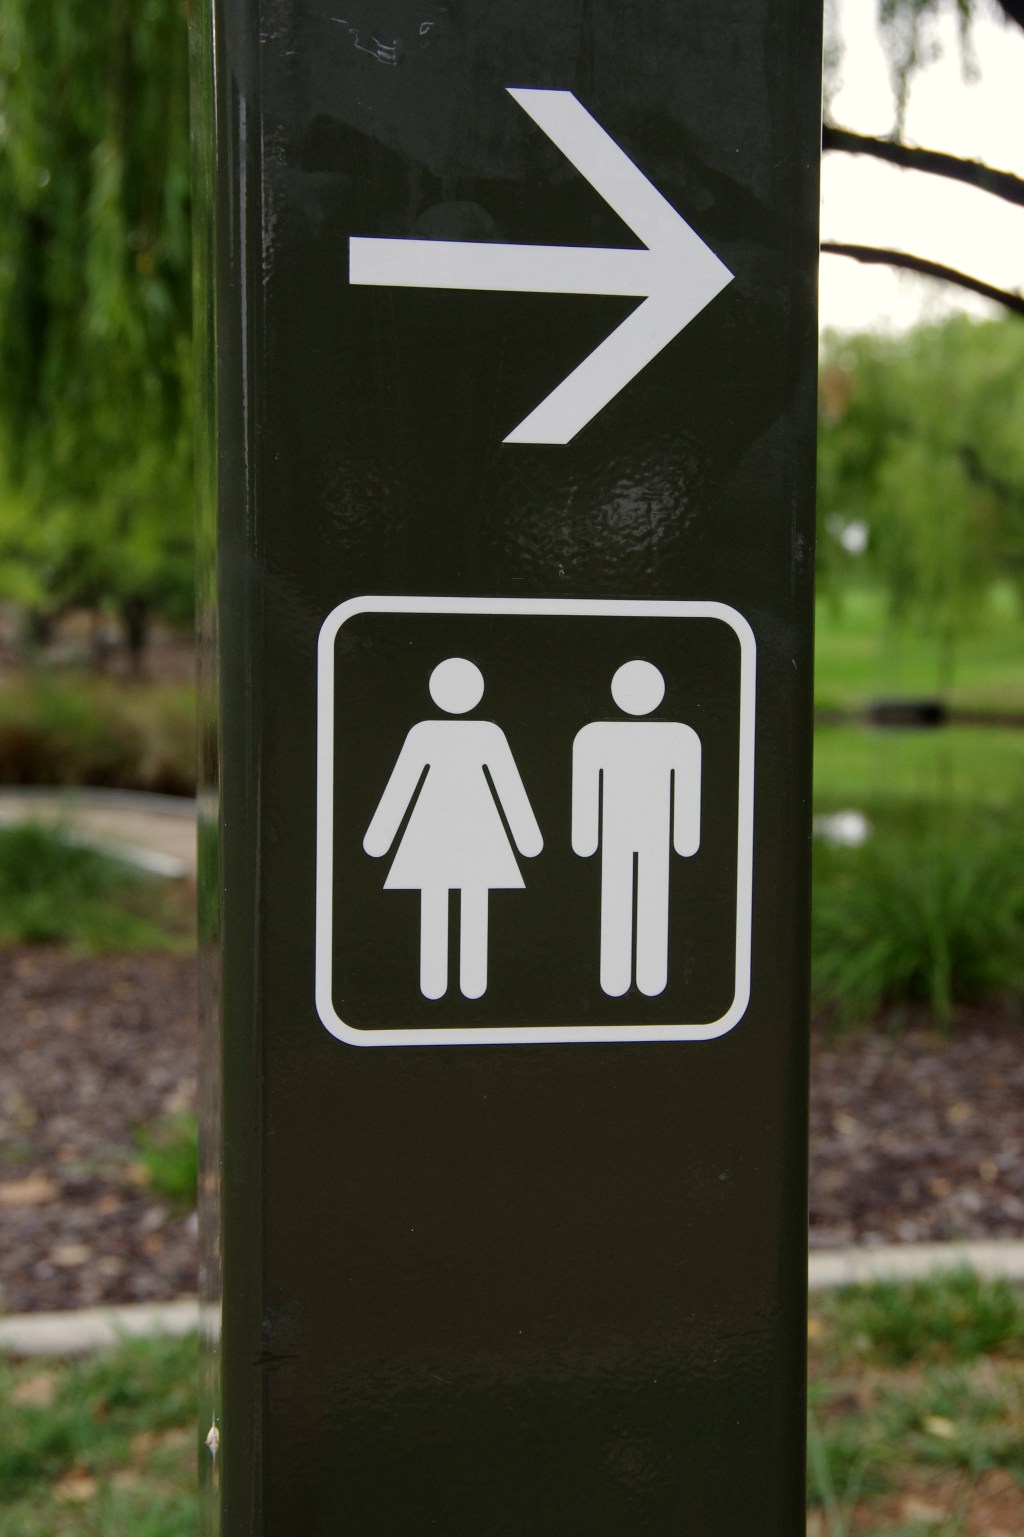 Sign post pointing to male and female public toilets in Weston Park, Yarralumla, Australian Capital Territory, Australia